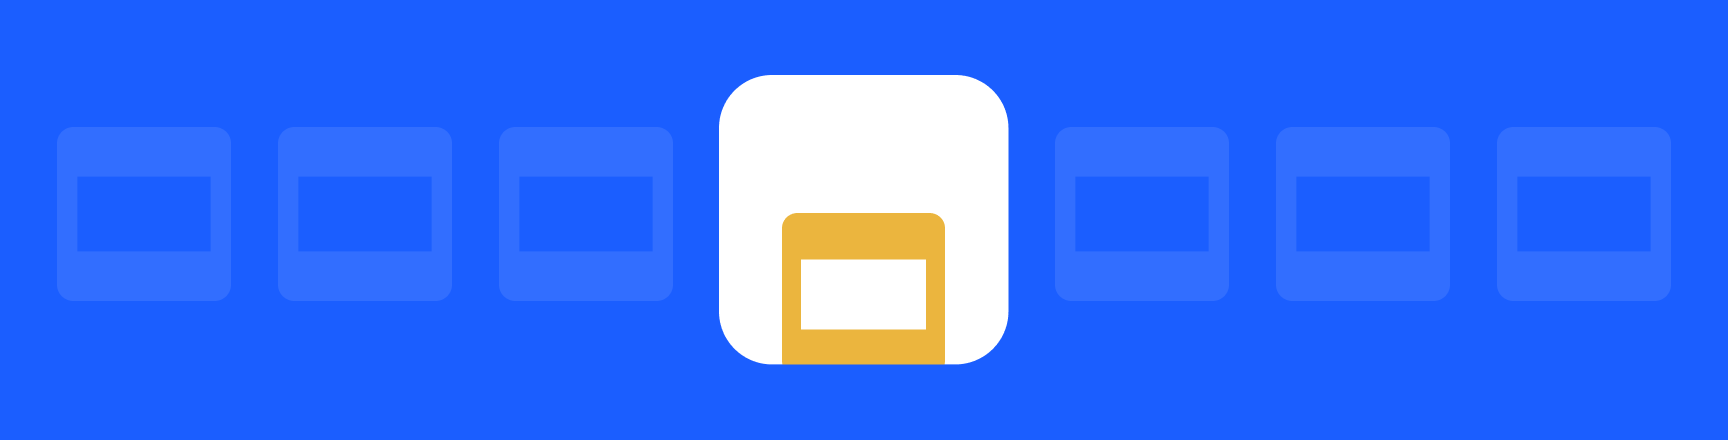 A white block with the Google Slides logo in the foreground, with a blue background